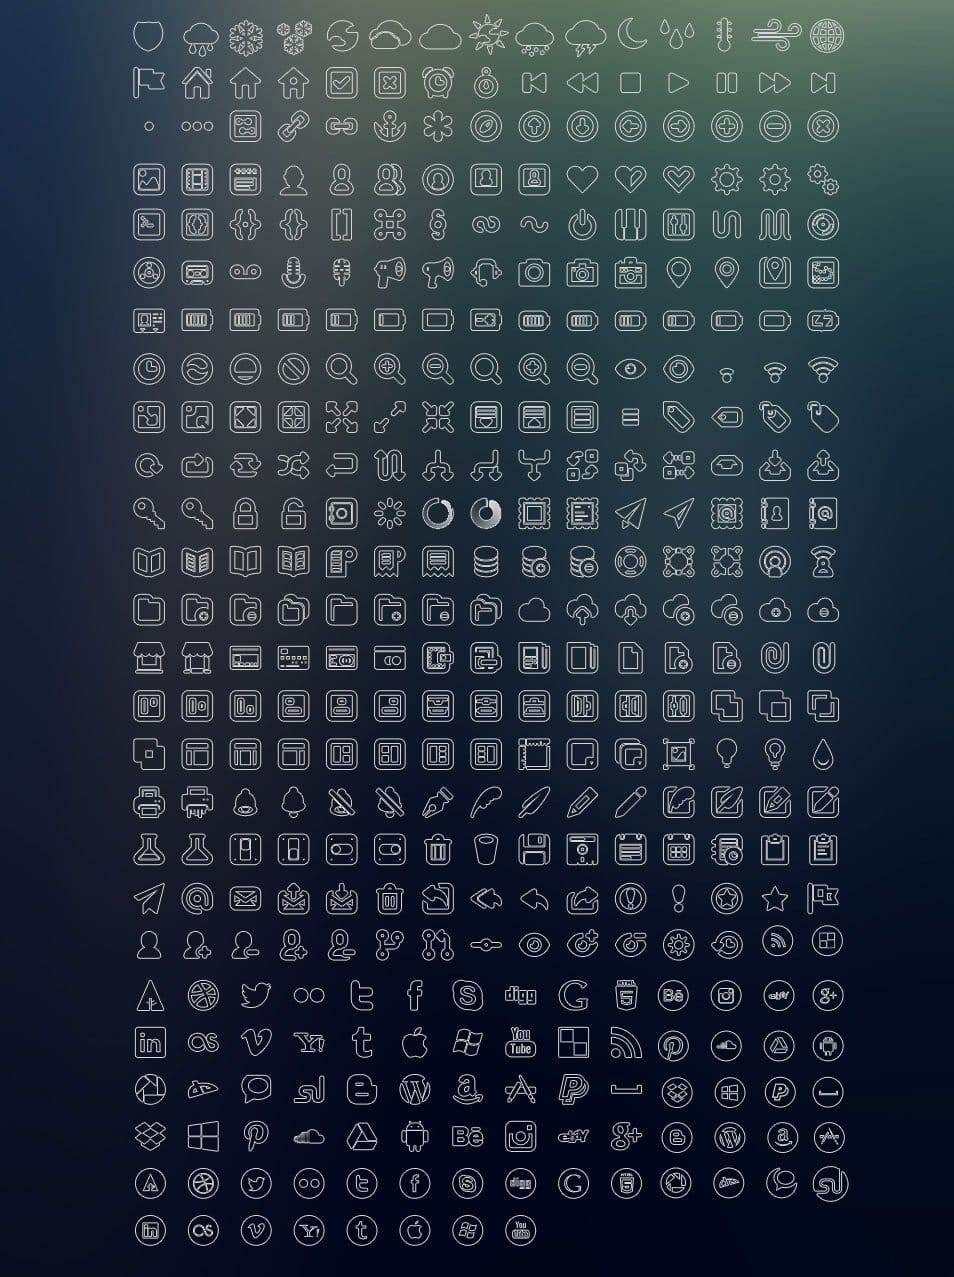 400+ Vector Outline Icon Set for Designers/Developers